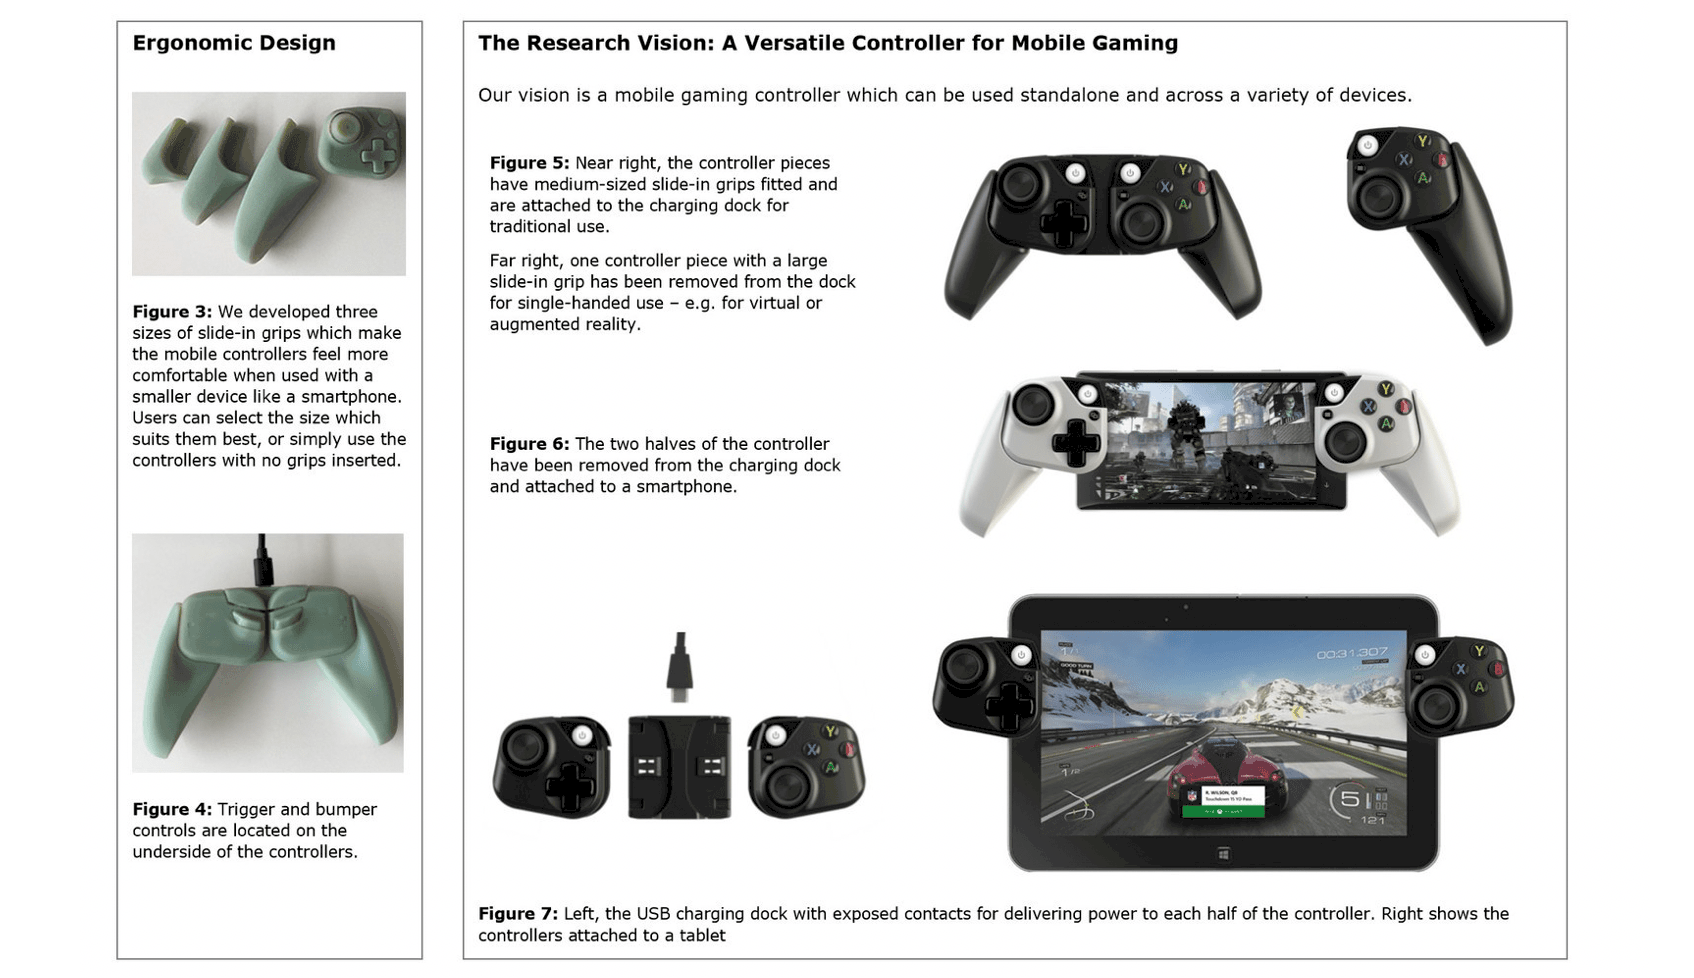 This patented mobile controller from Microsoft may bring console quality gaming to your phone - OnMSFT.com - July 9, 2019